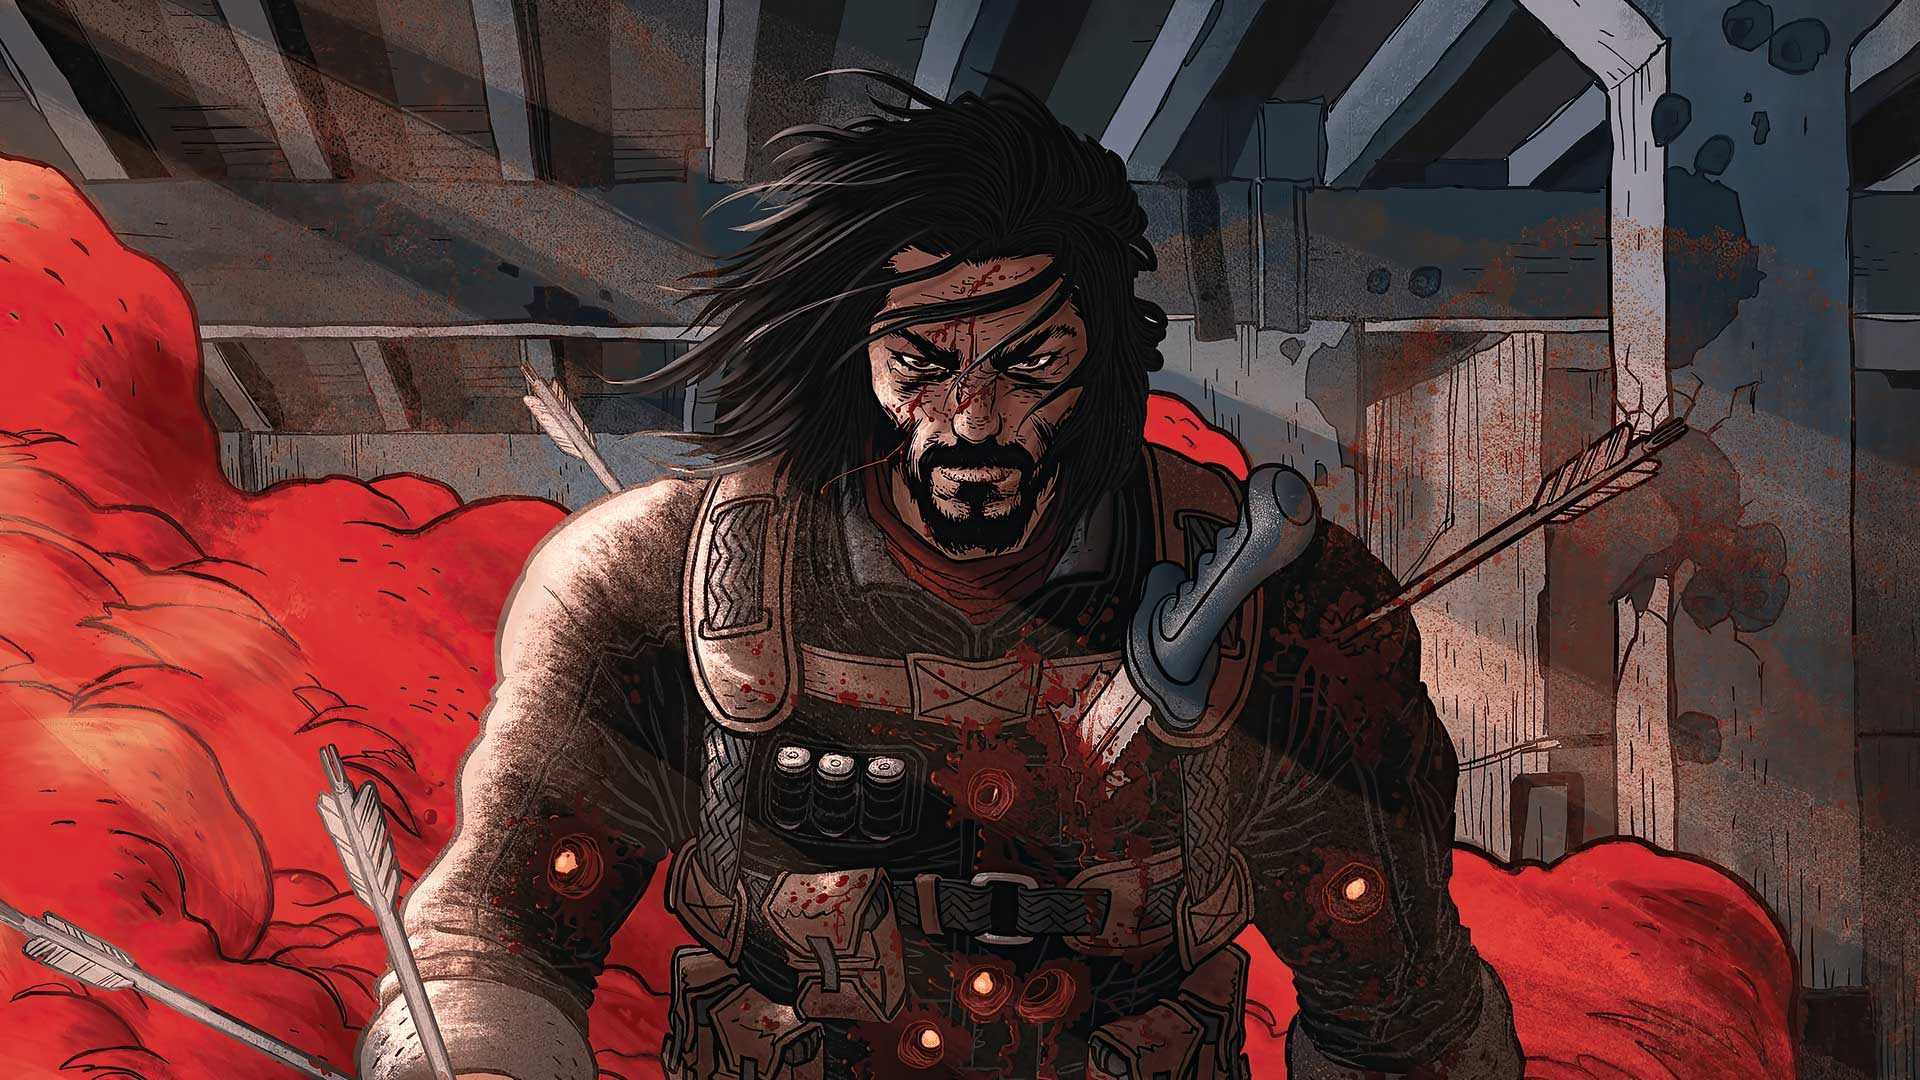 BRZRKR is The Keanu Reeves Comic Book Series You Need in Your Life